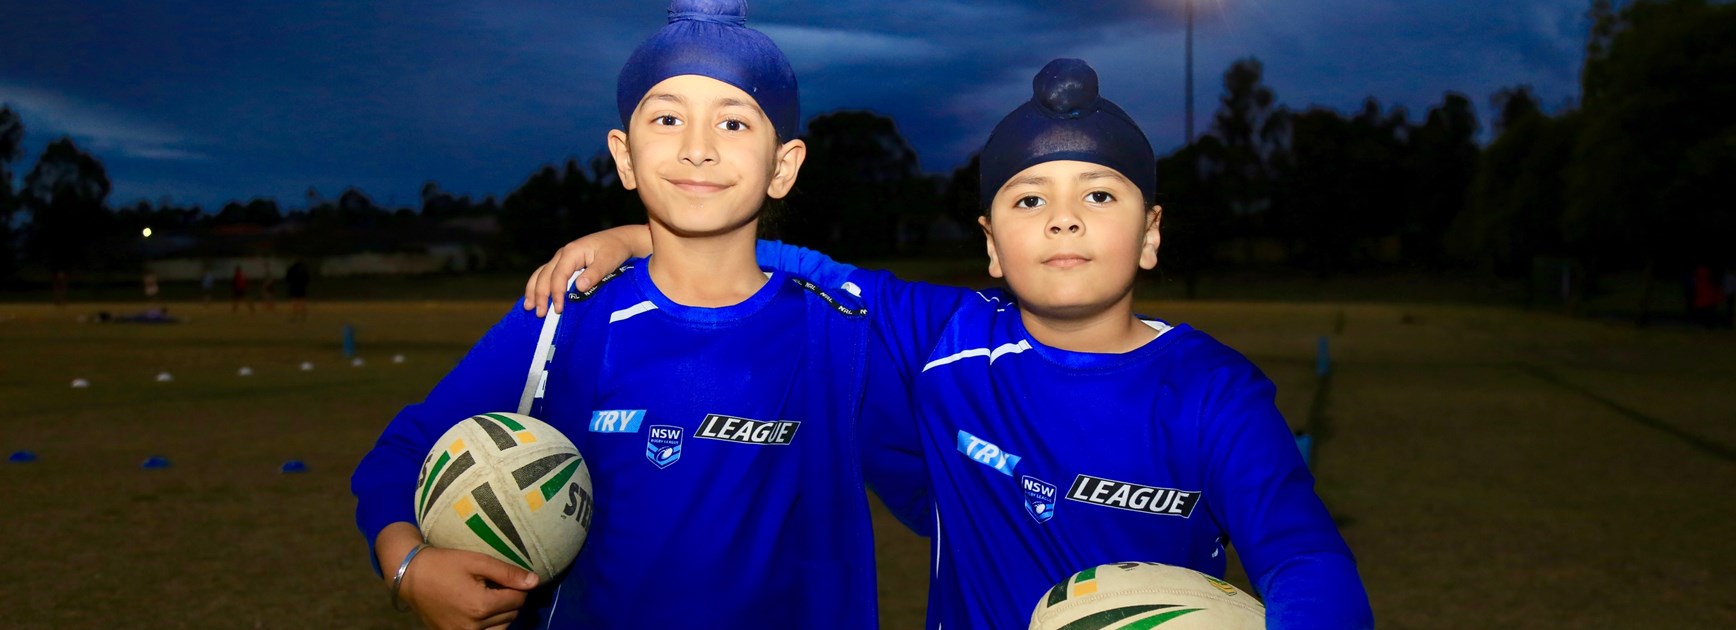 Children from diverse communities to try Rugby League